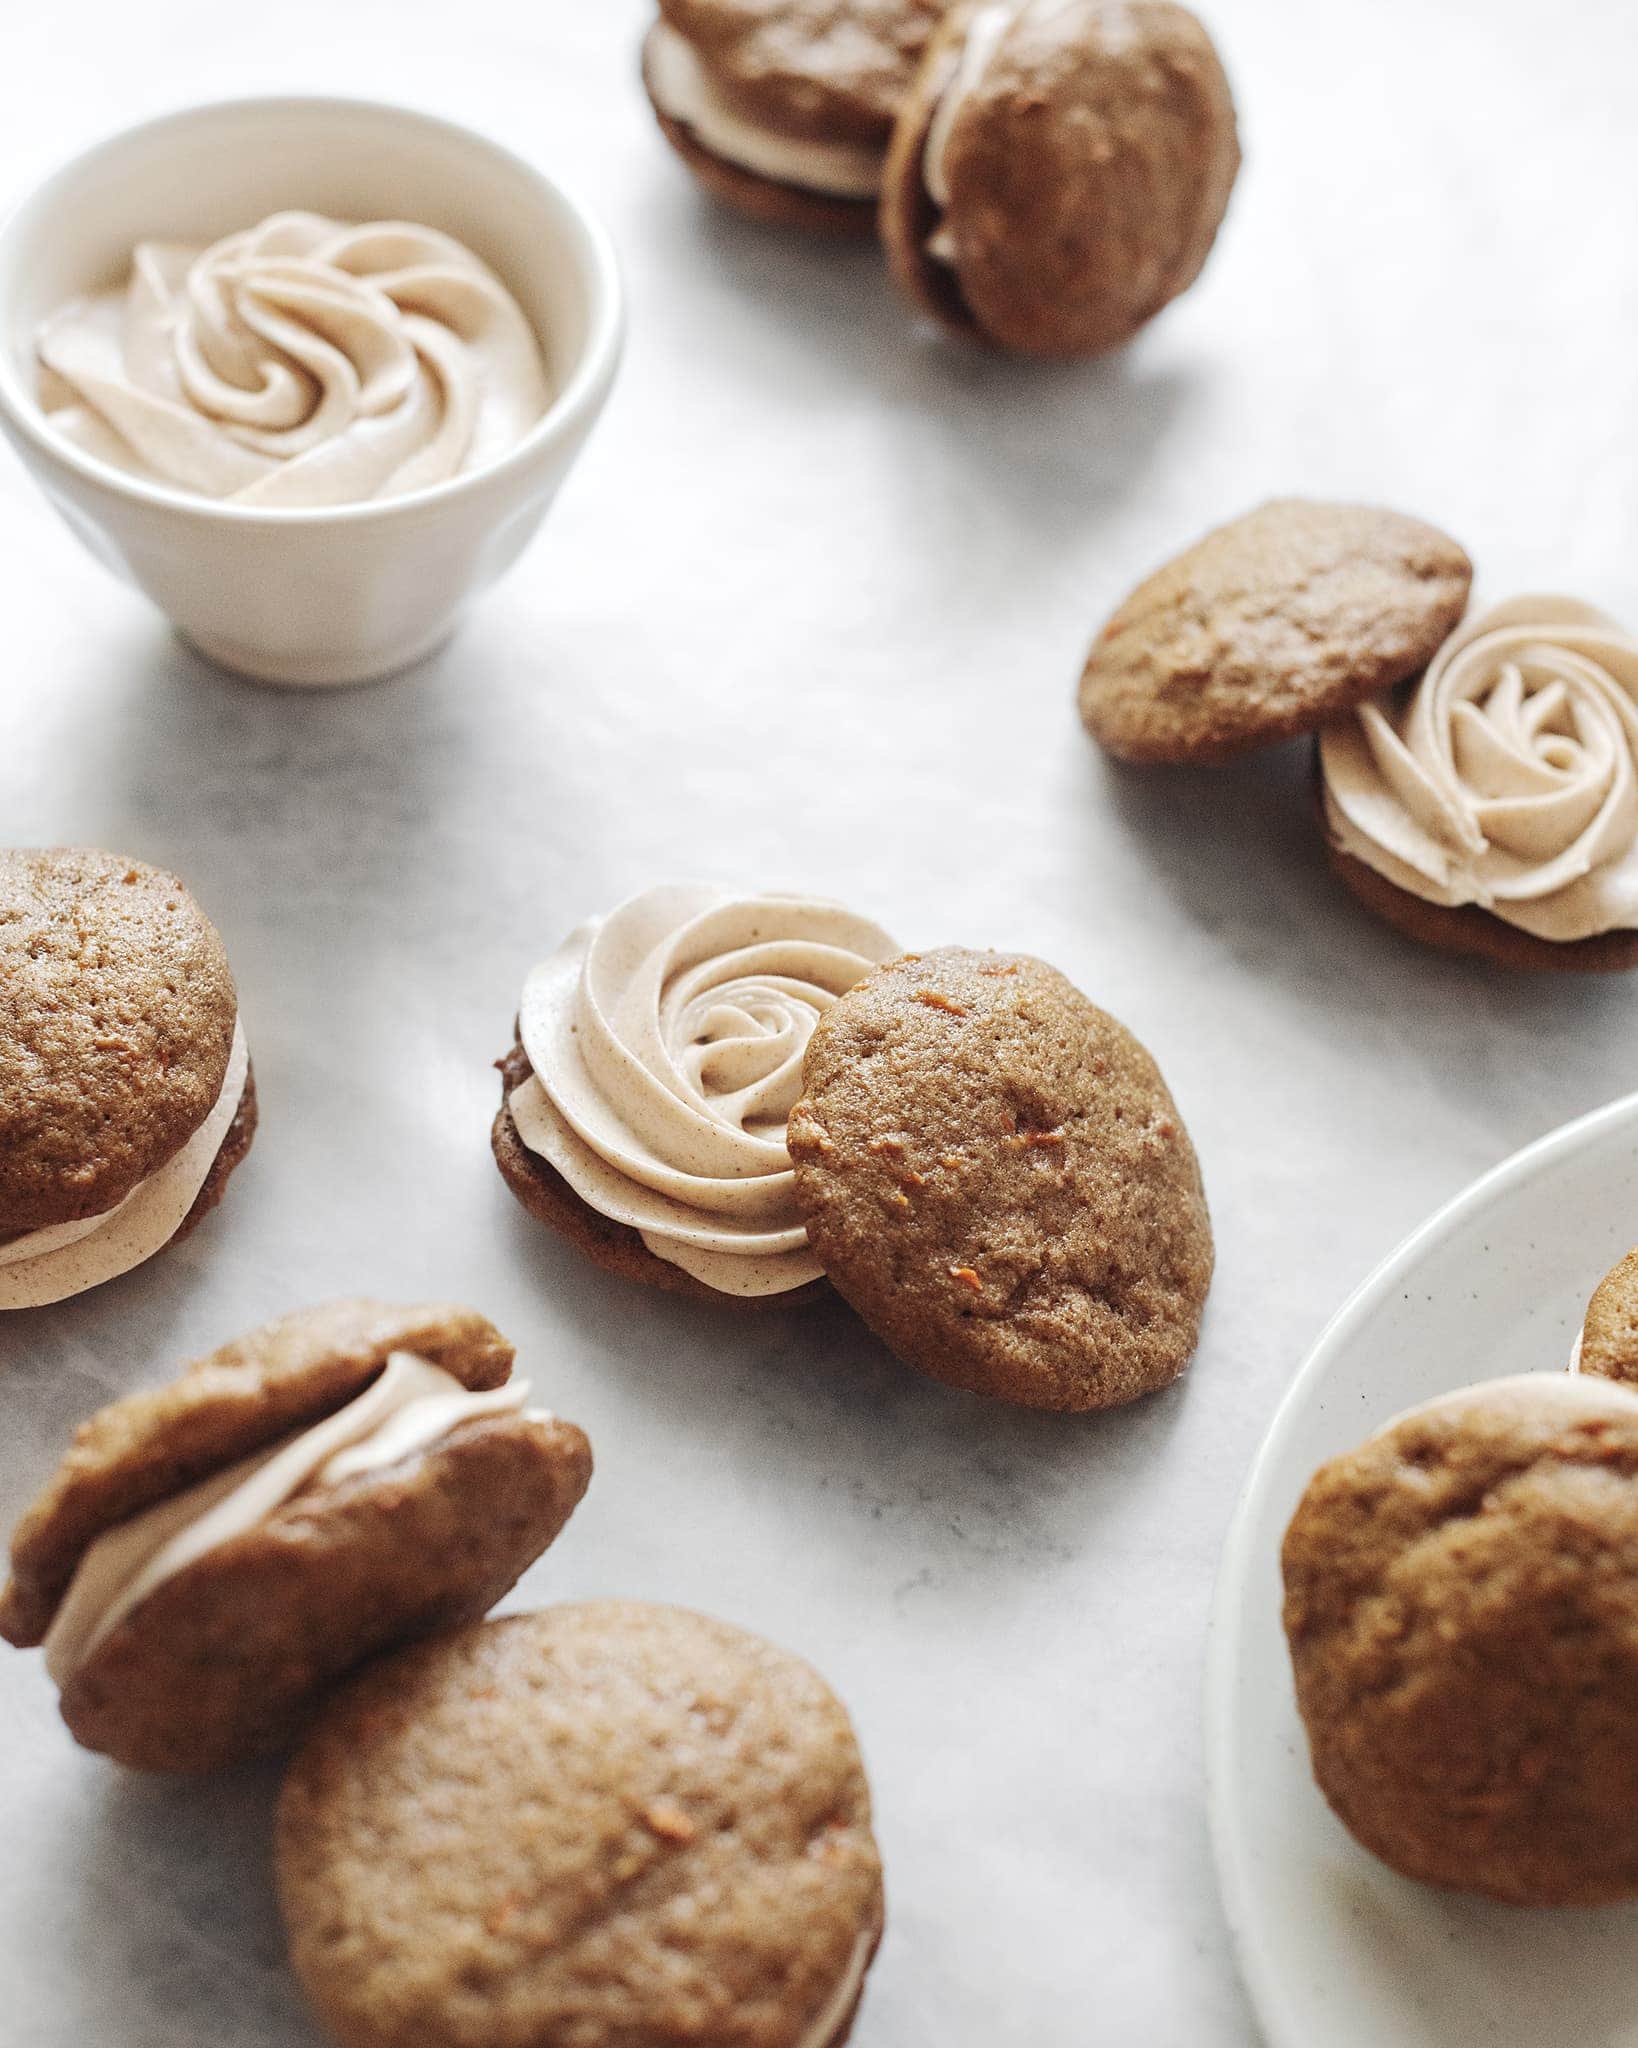 Cream cheese piped in a swirl on carrot cake cookies